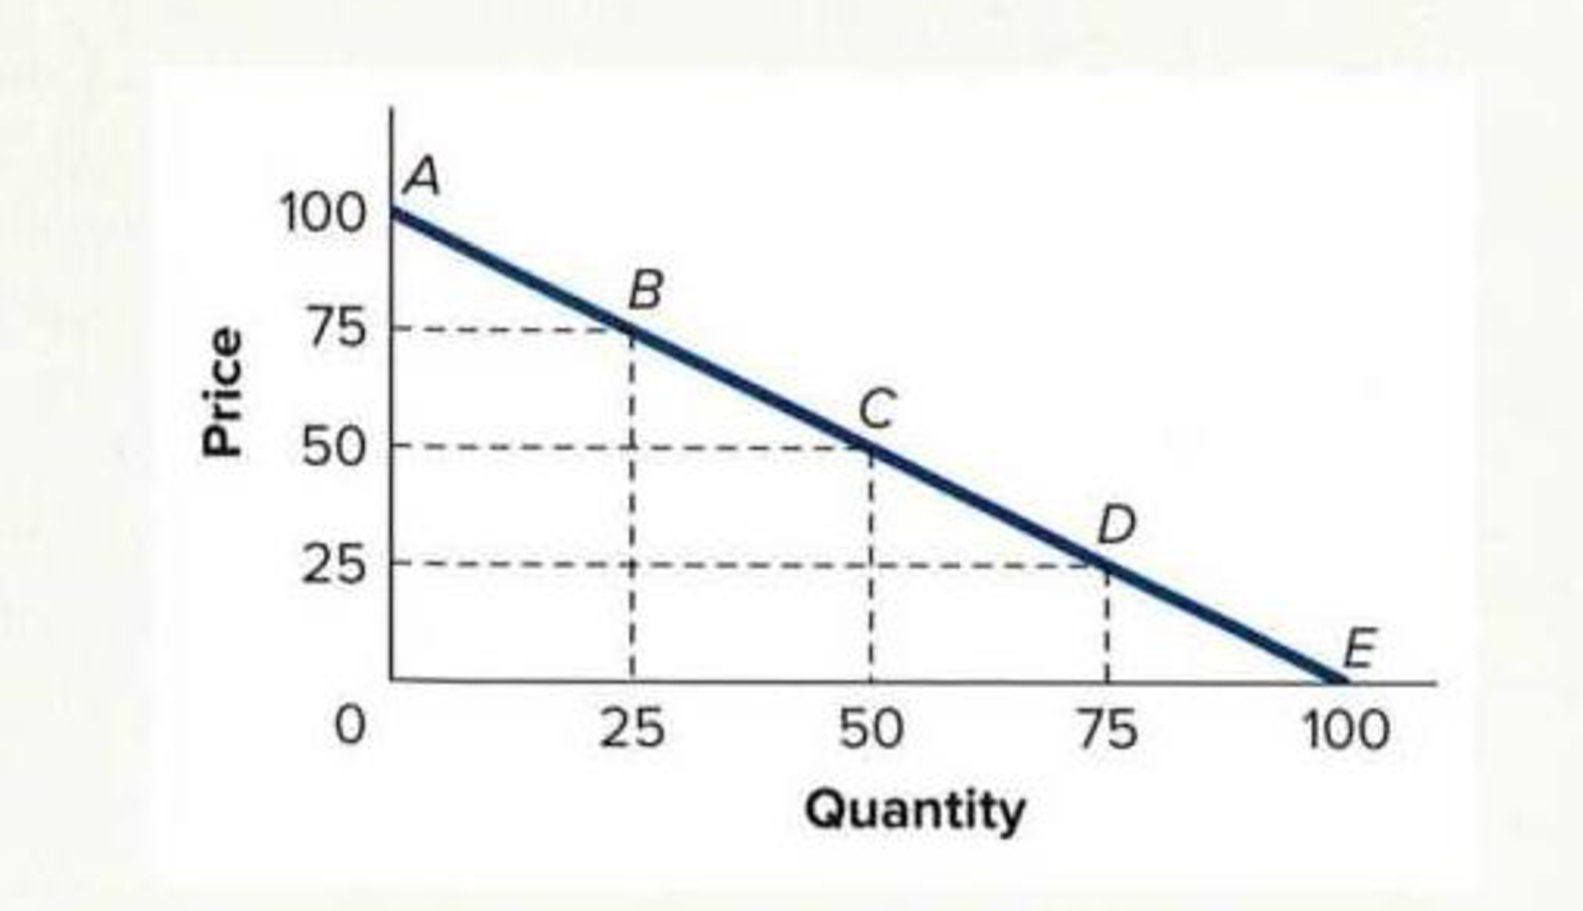 Chapter 4, Problem 3P, Calculate the price elasticity of demand (in absolute value) at points A, B, C, D), and E on the 